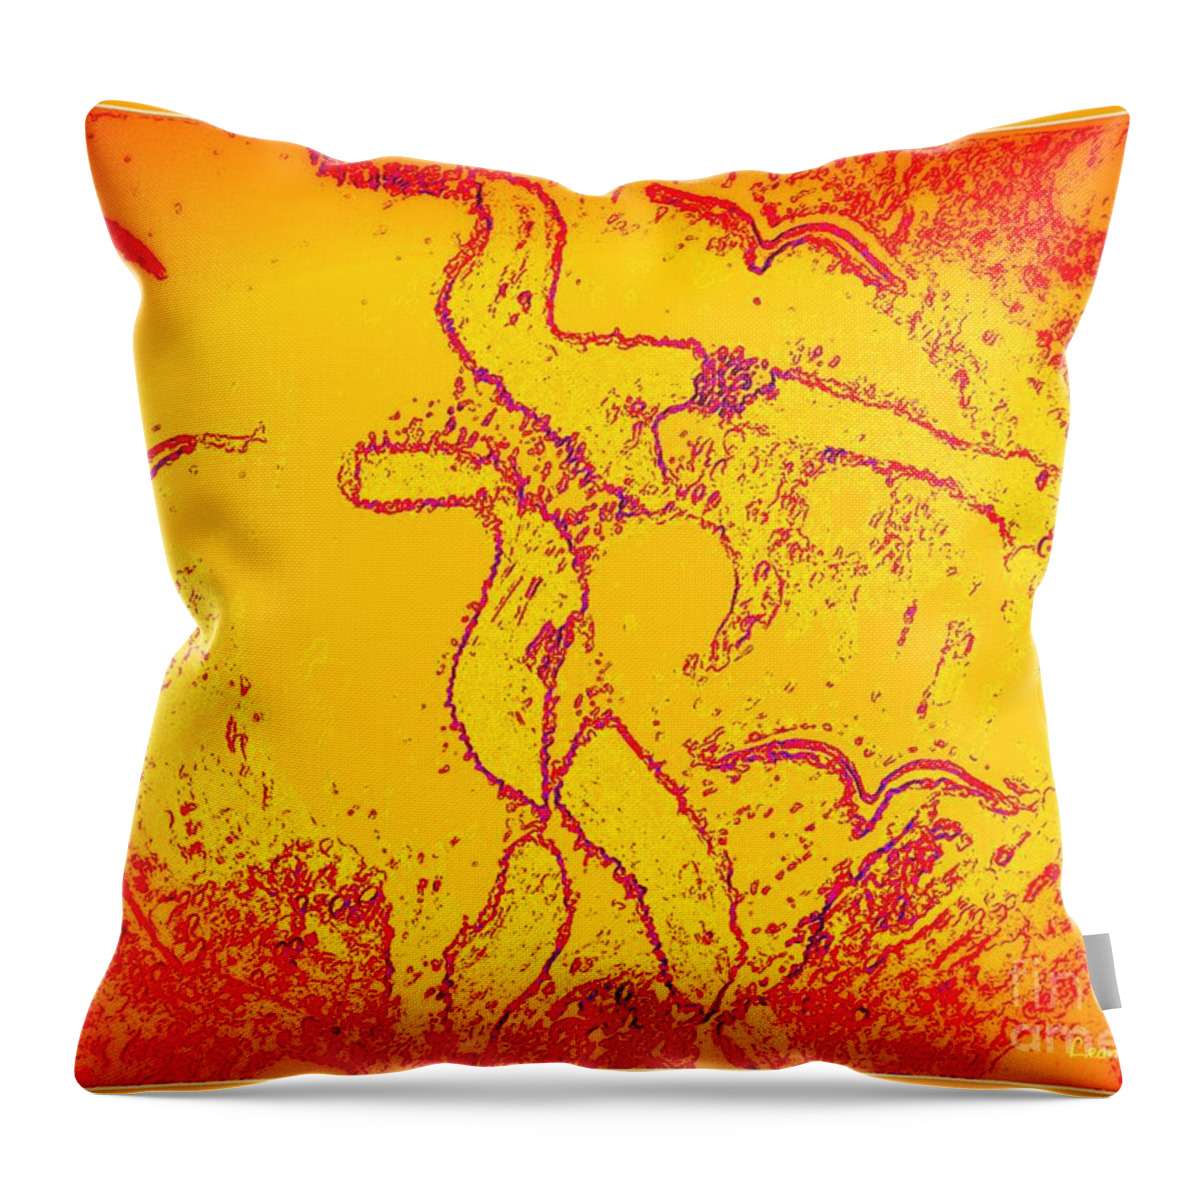 Feminine Figure Throw Pillow featuring the mixed media Passing Through by Leanne Seymour